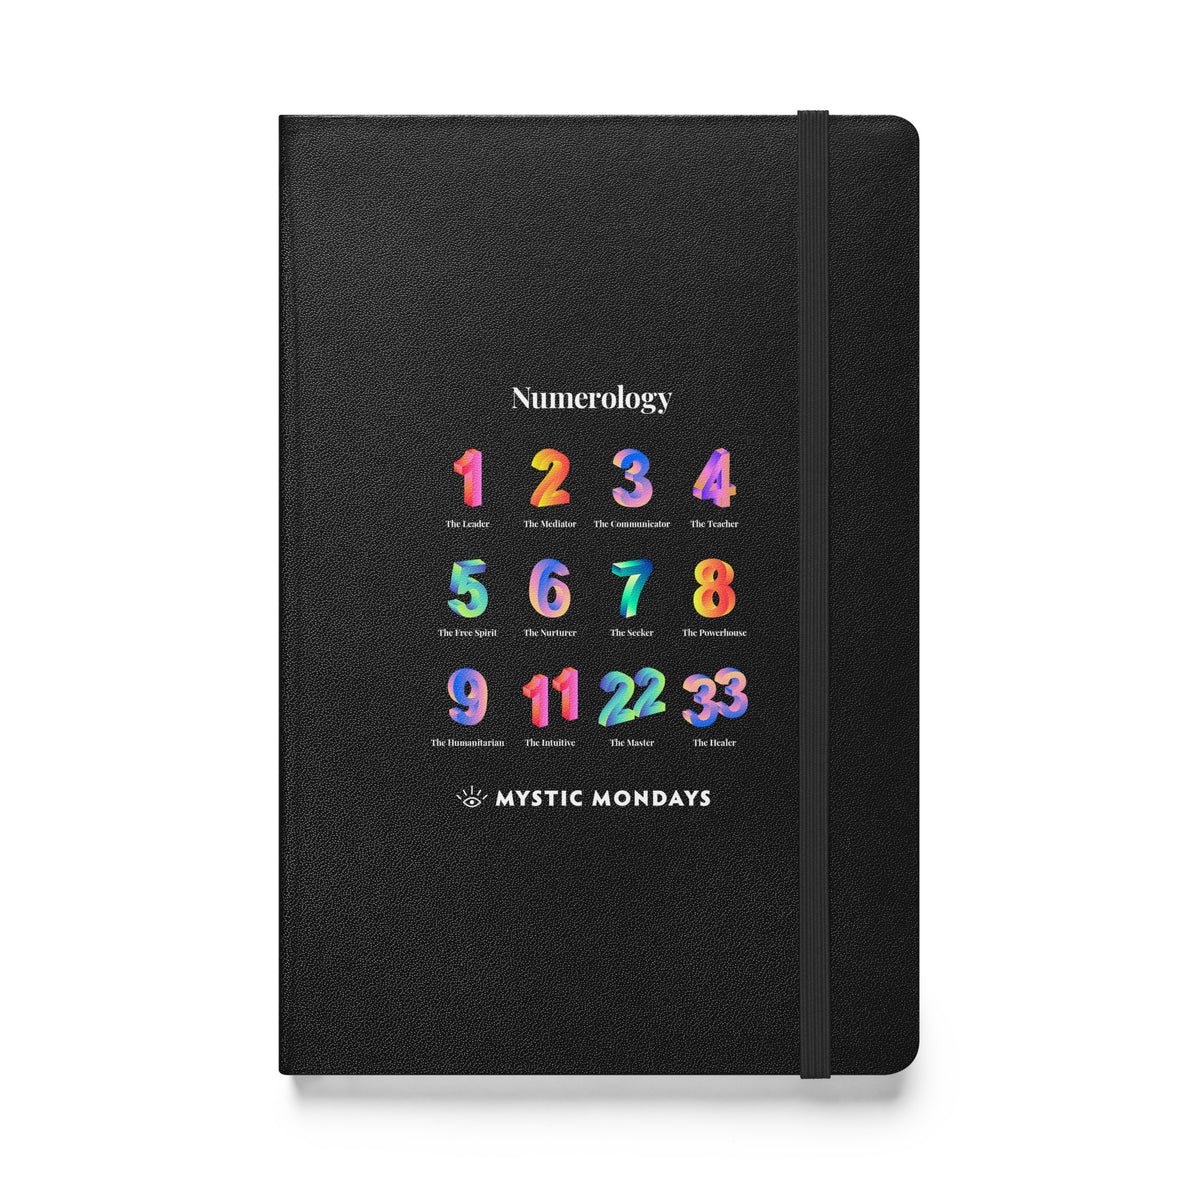 Numerology Hardcover Journal